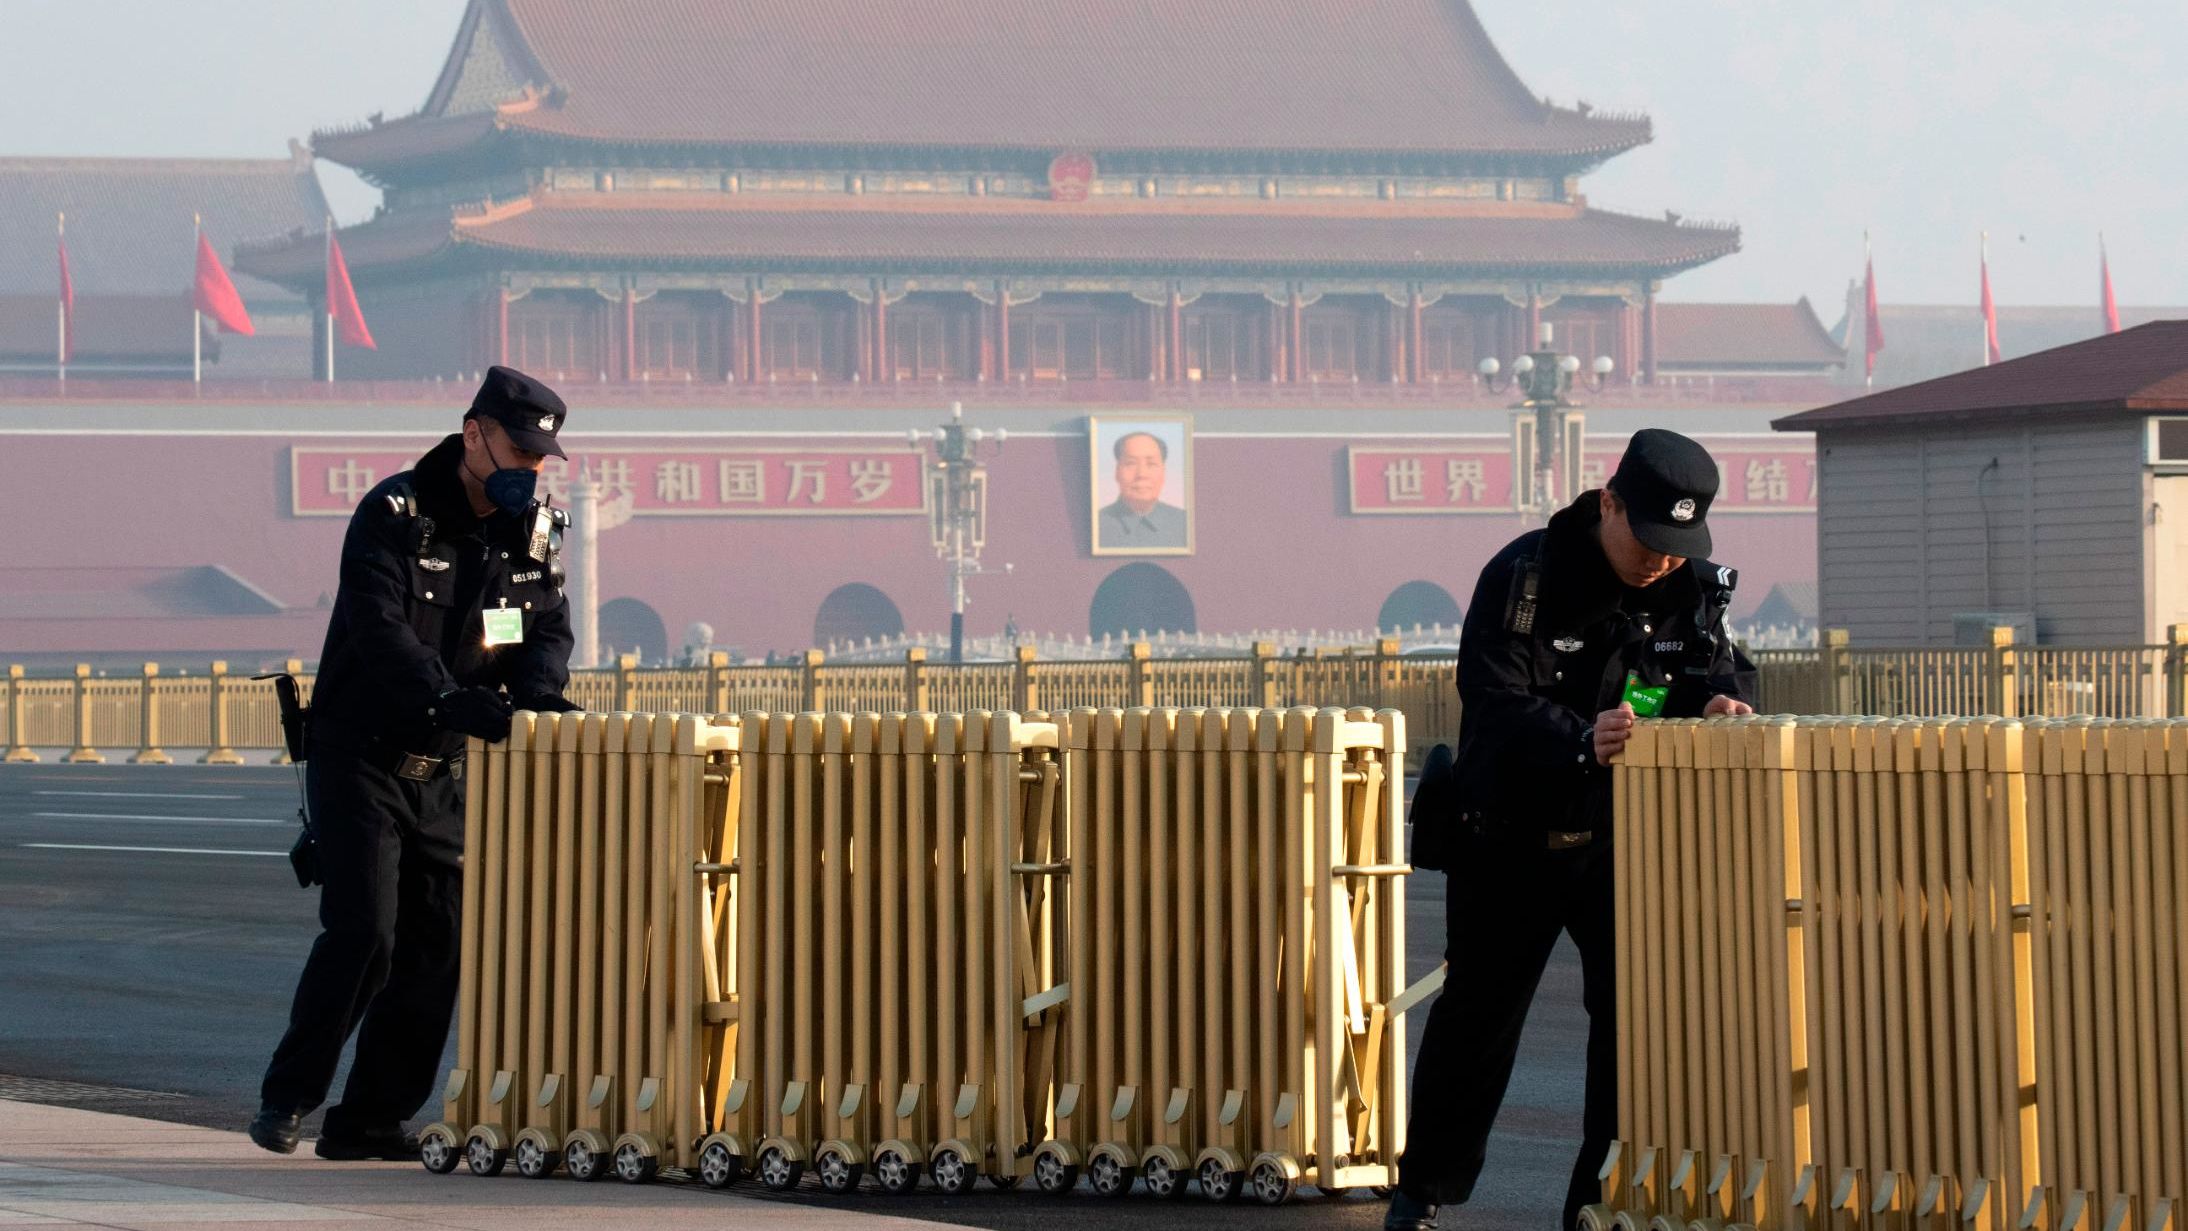 Chinese police officers push away barriers before delegates arrive for a meeting on the eve of the opening session of the National People's Congress, at the Great Hall of the People in Beijing, China, Monday, March 4, 2019. 